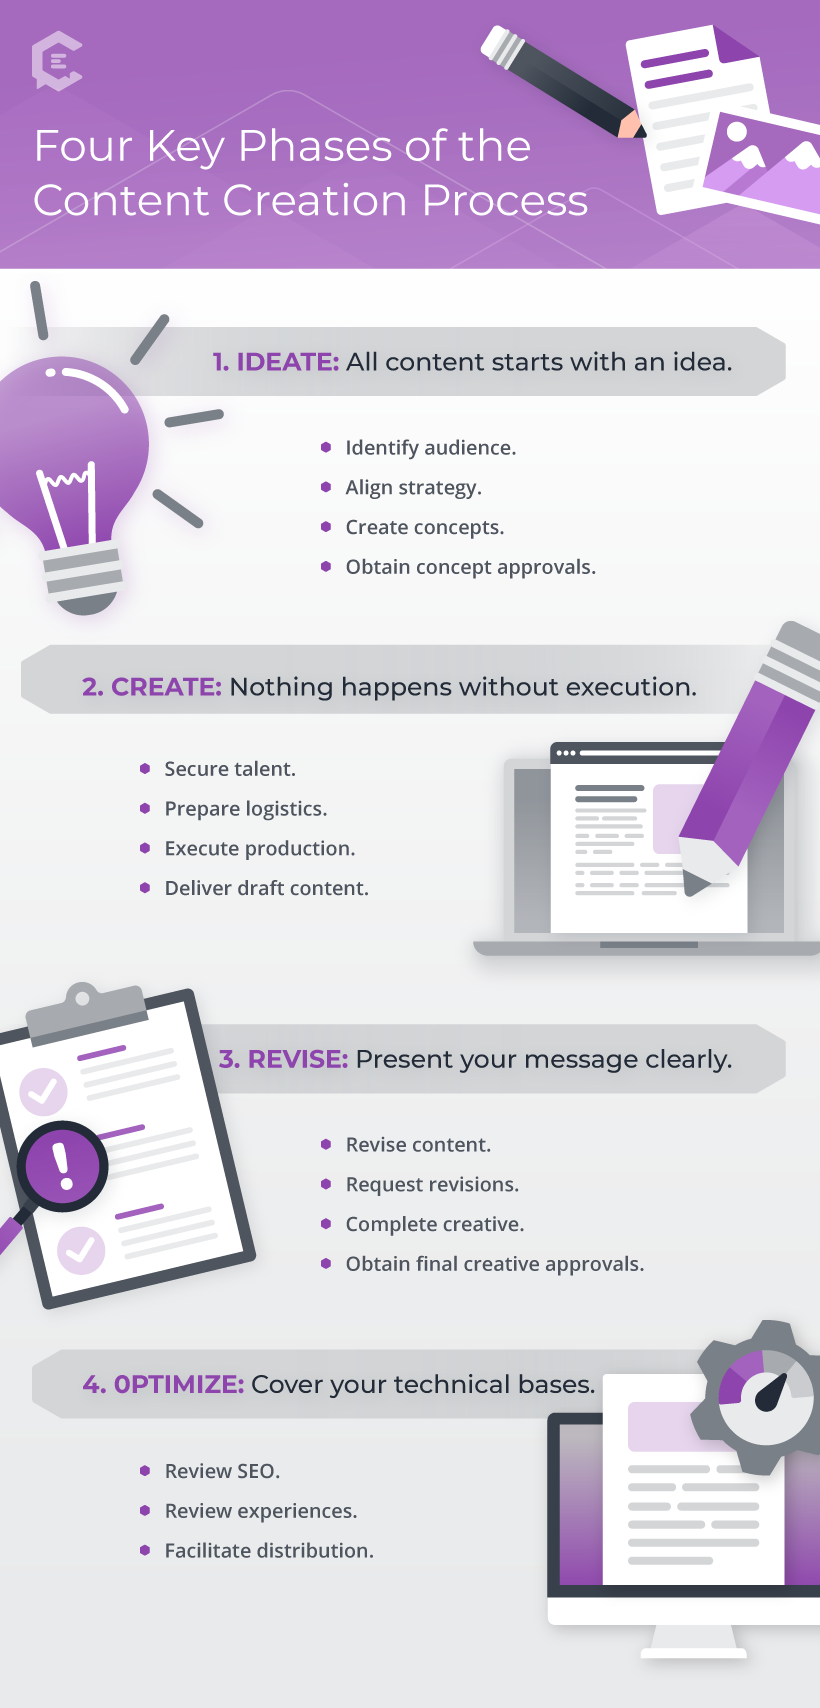 4 Key Phases of the Content Creation Process